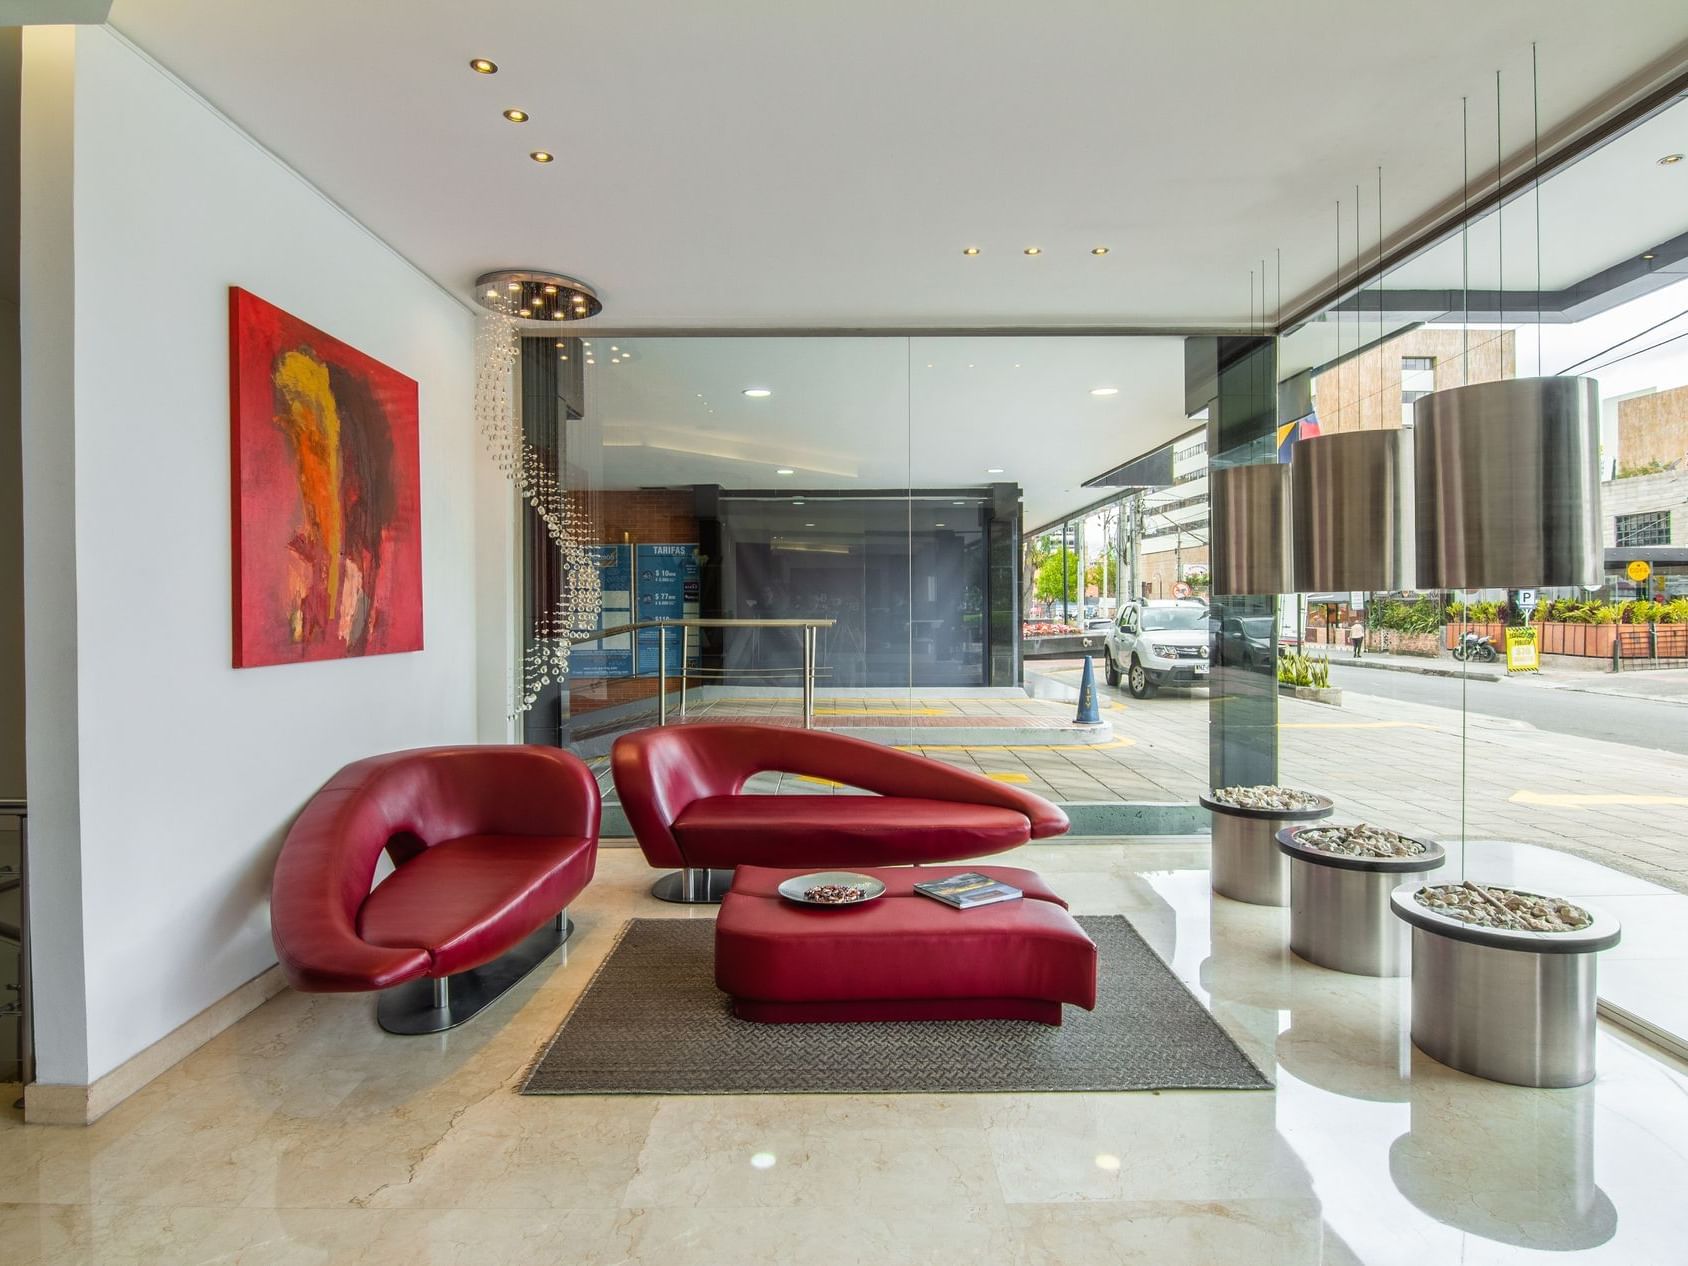 The lobby area with red couches, a coffee table and a fireplace